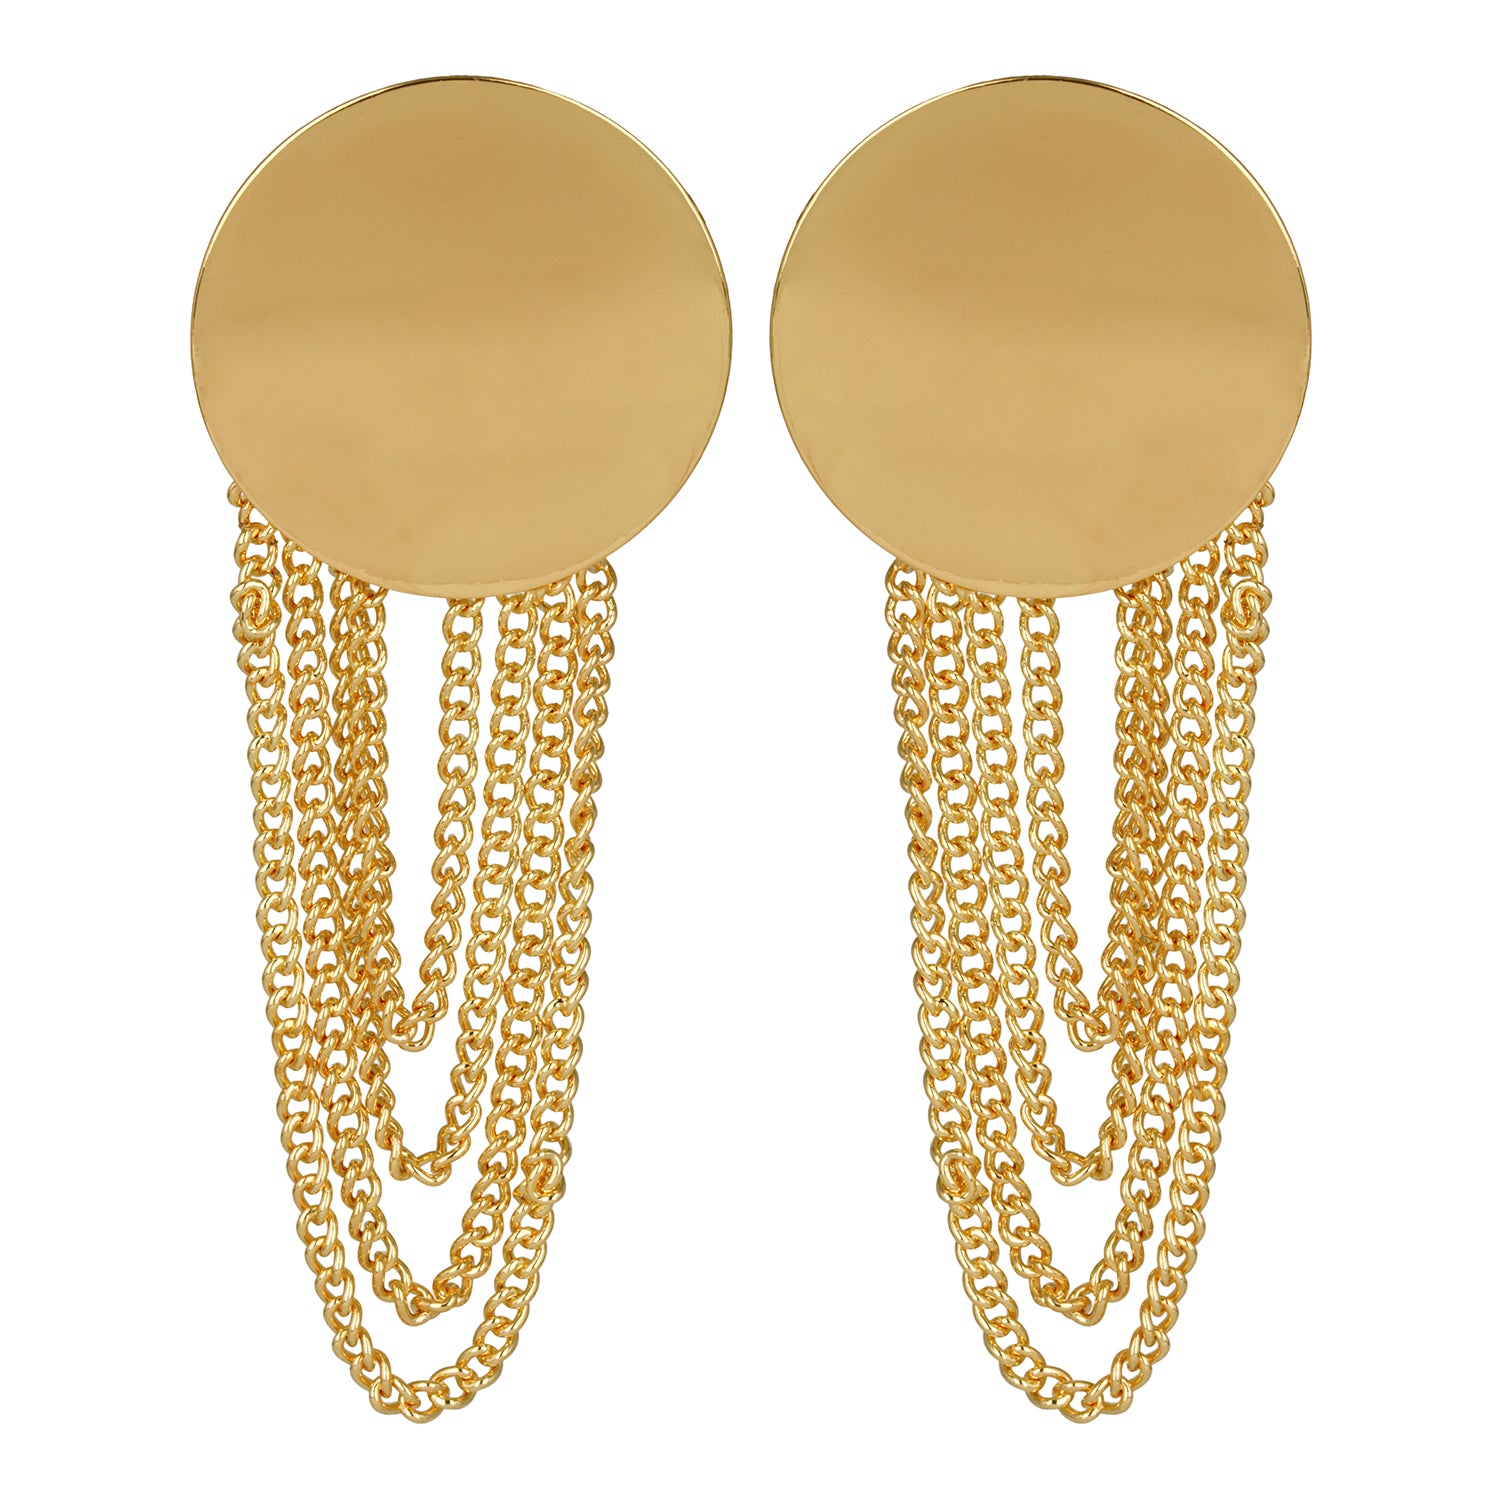 Simple 3 chain Tops | Gold earrings models, Pretty gold necklaces, Gold earrings  designs